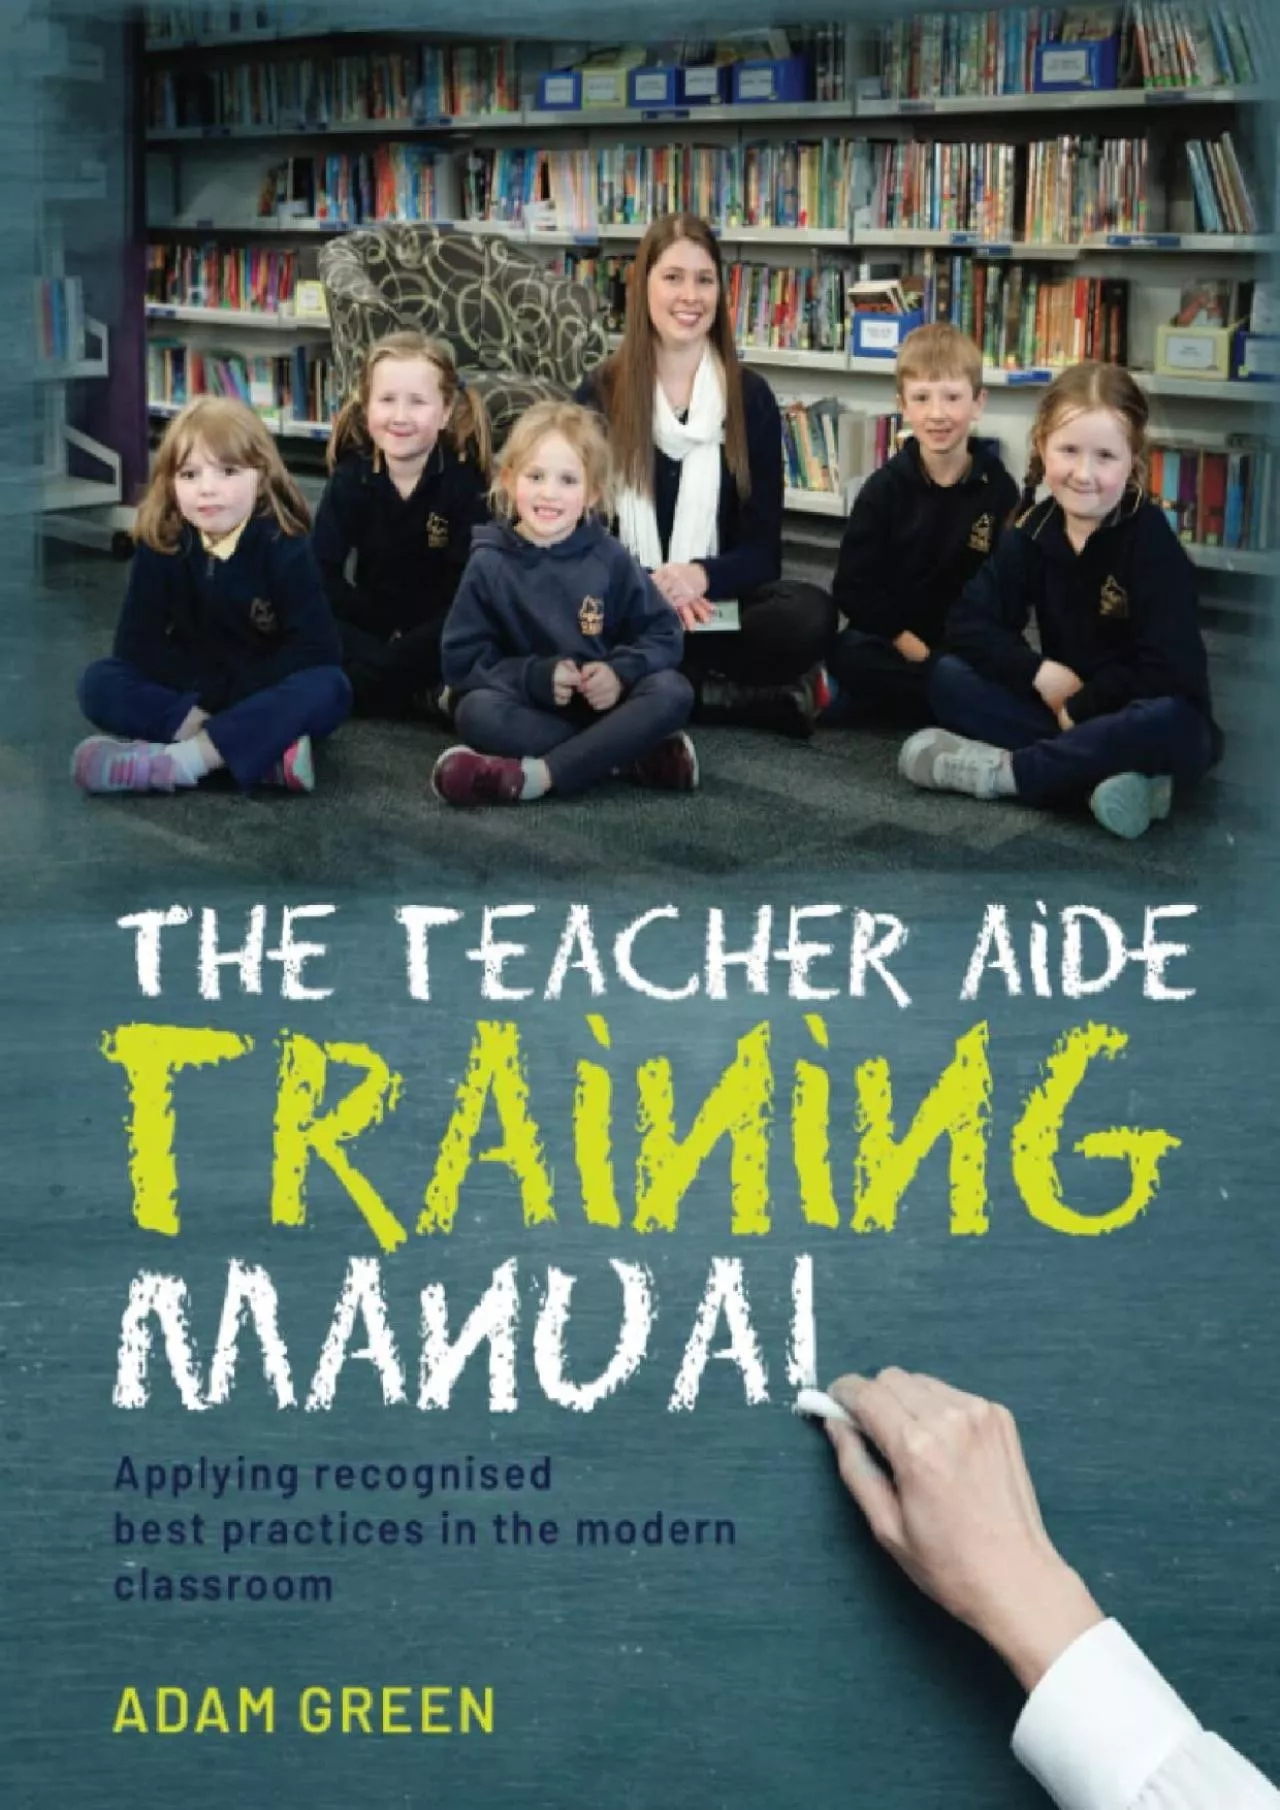 [EBOOK] The Teacher Aide Training Manual: Applying recognised best practices in the modern